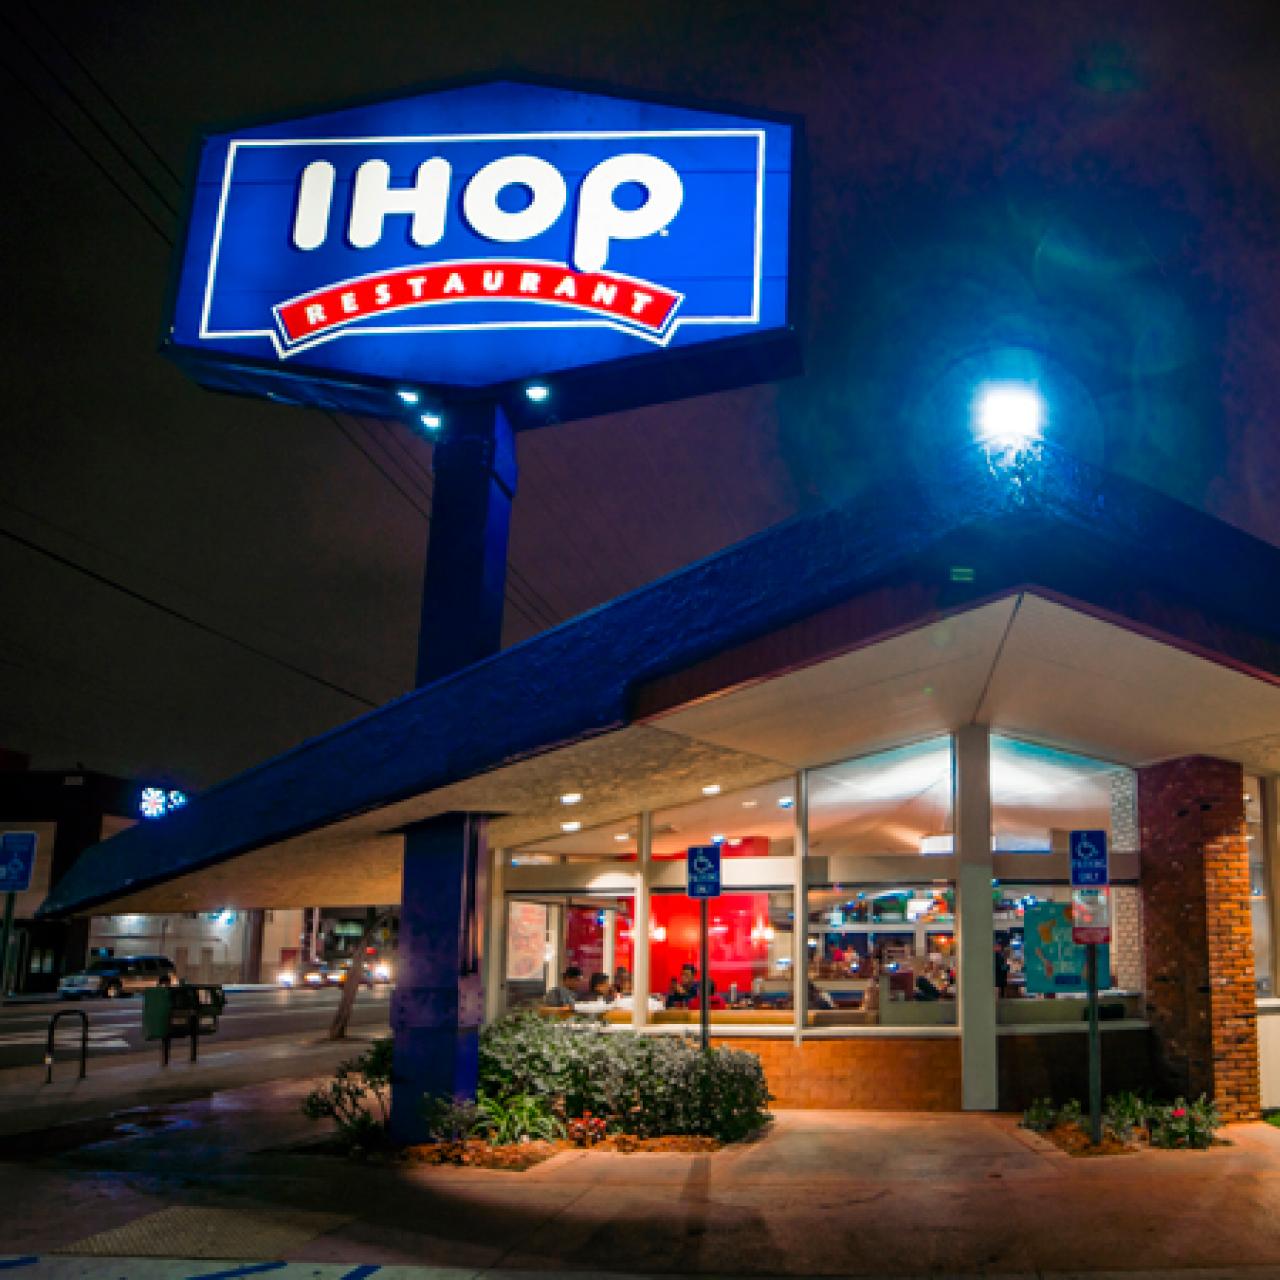 Boozy Brunch at IHOP May Finally Be in Your Future